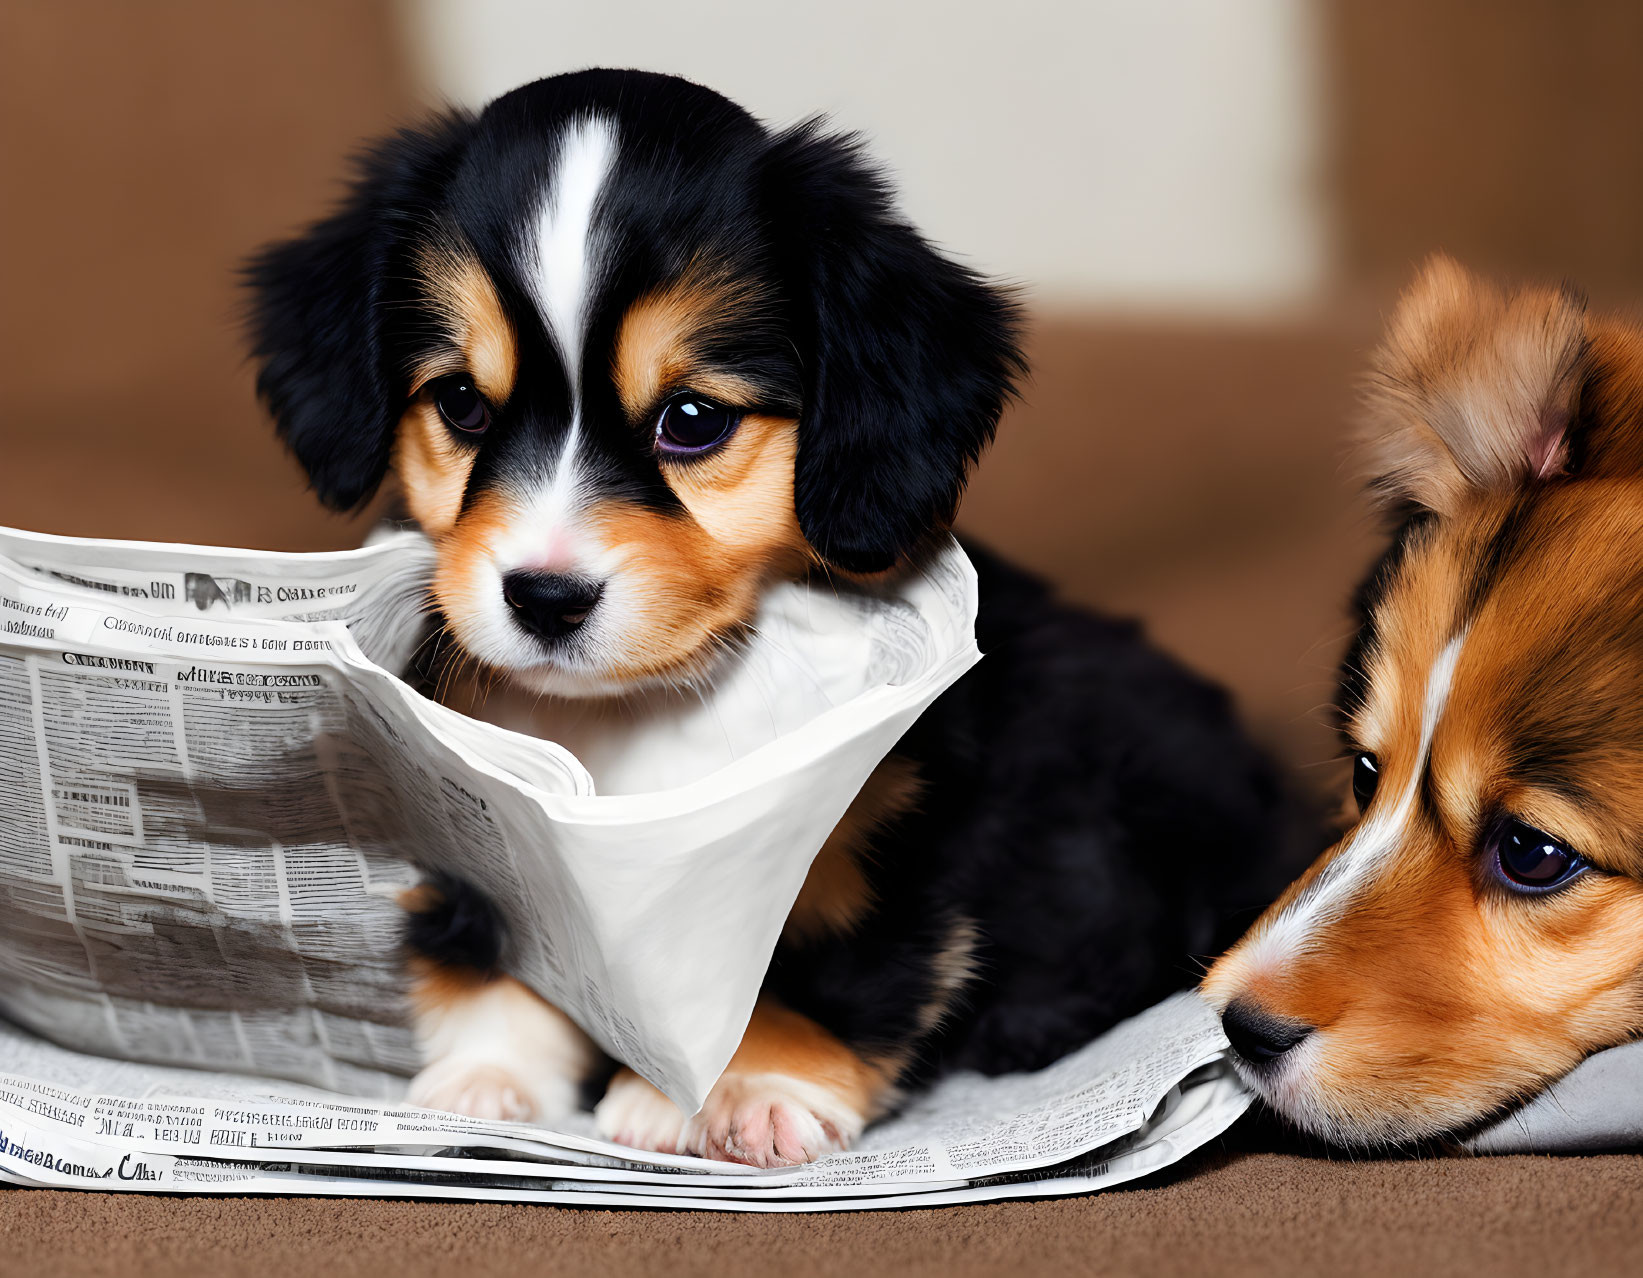 Two cute puppies, one reading a newspaper, the other curious.